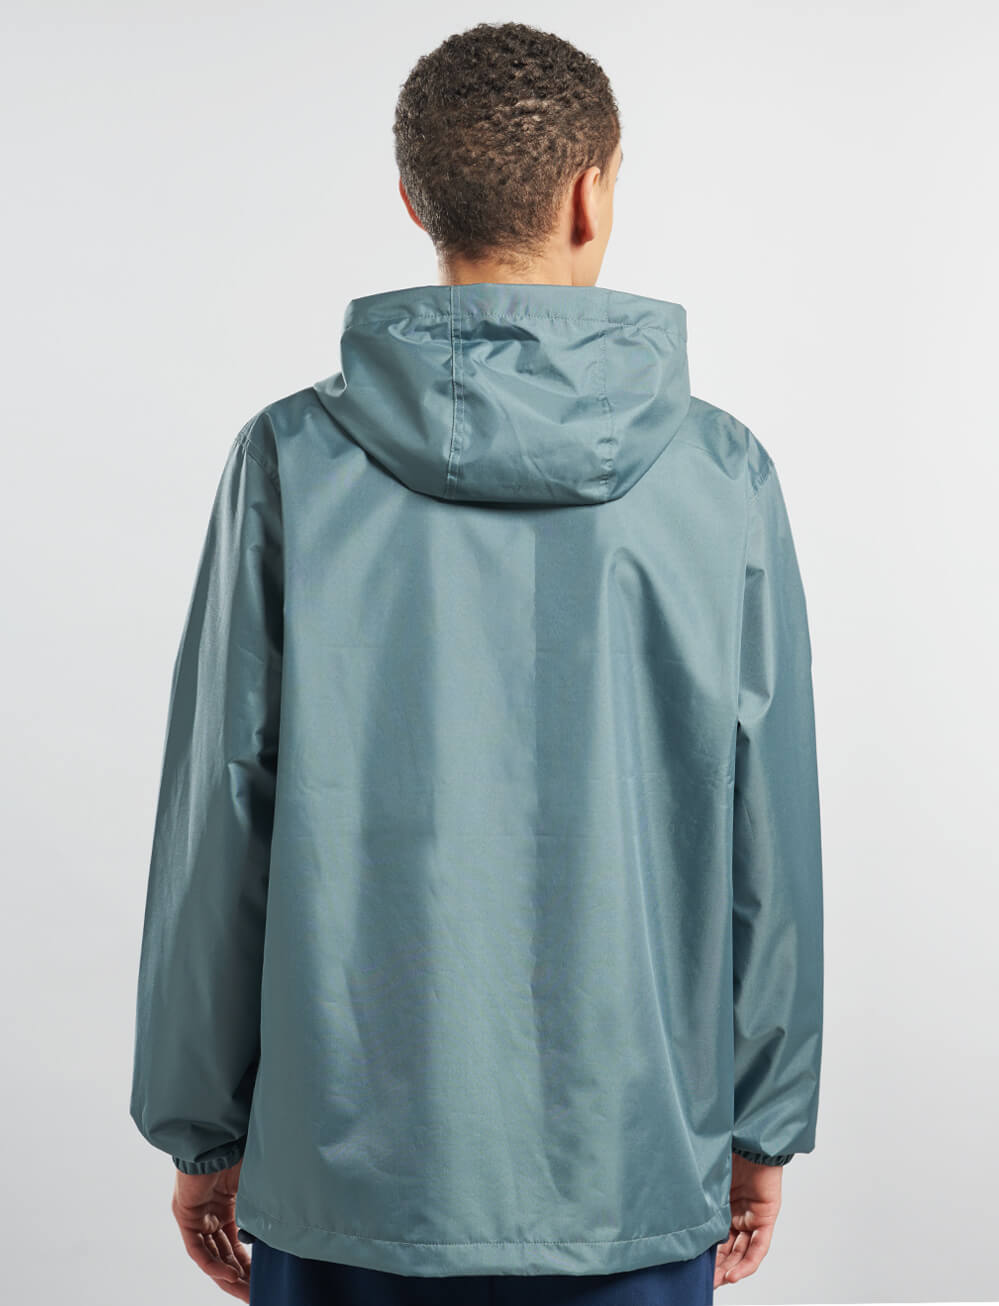 Official Tottenham Shower Jacket - Stormy Weather - The World Football Store